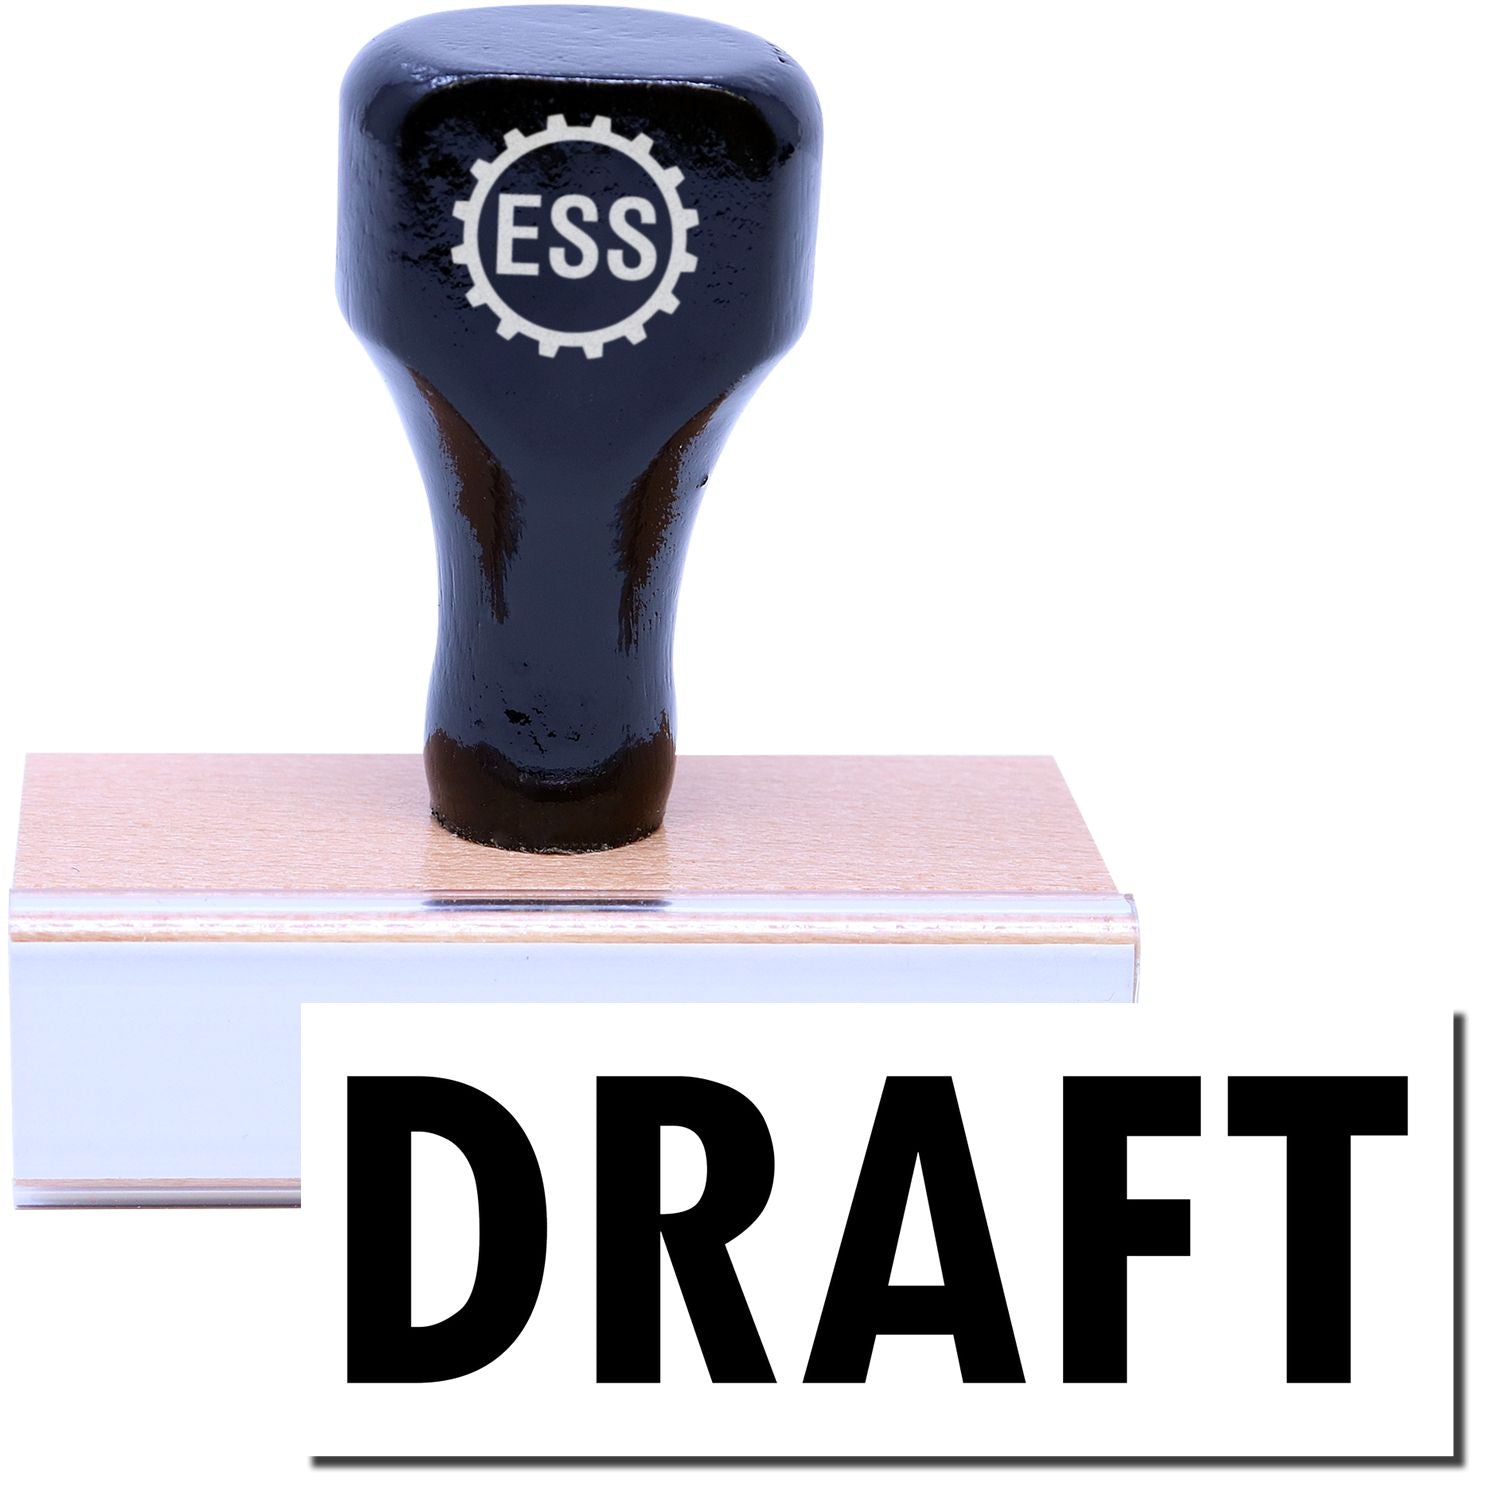 A stock office rubber stamp with a stamped image showing how the text "DRAFT" is displayed after stamping.